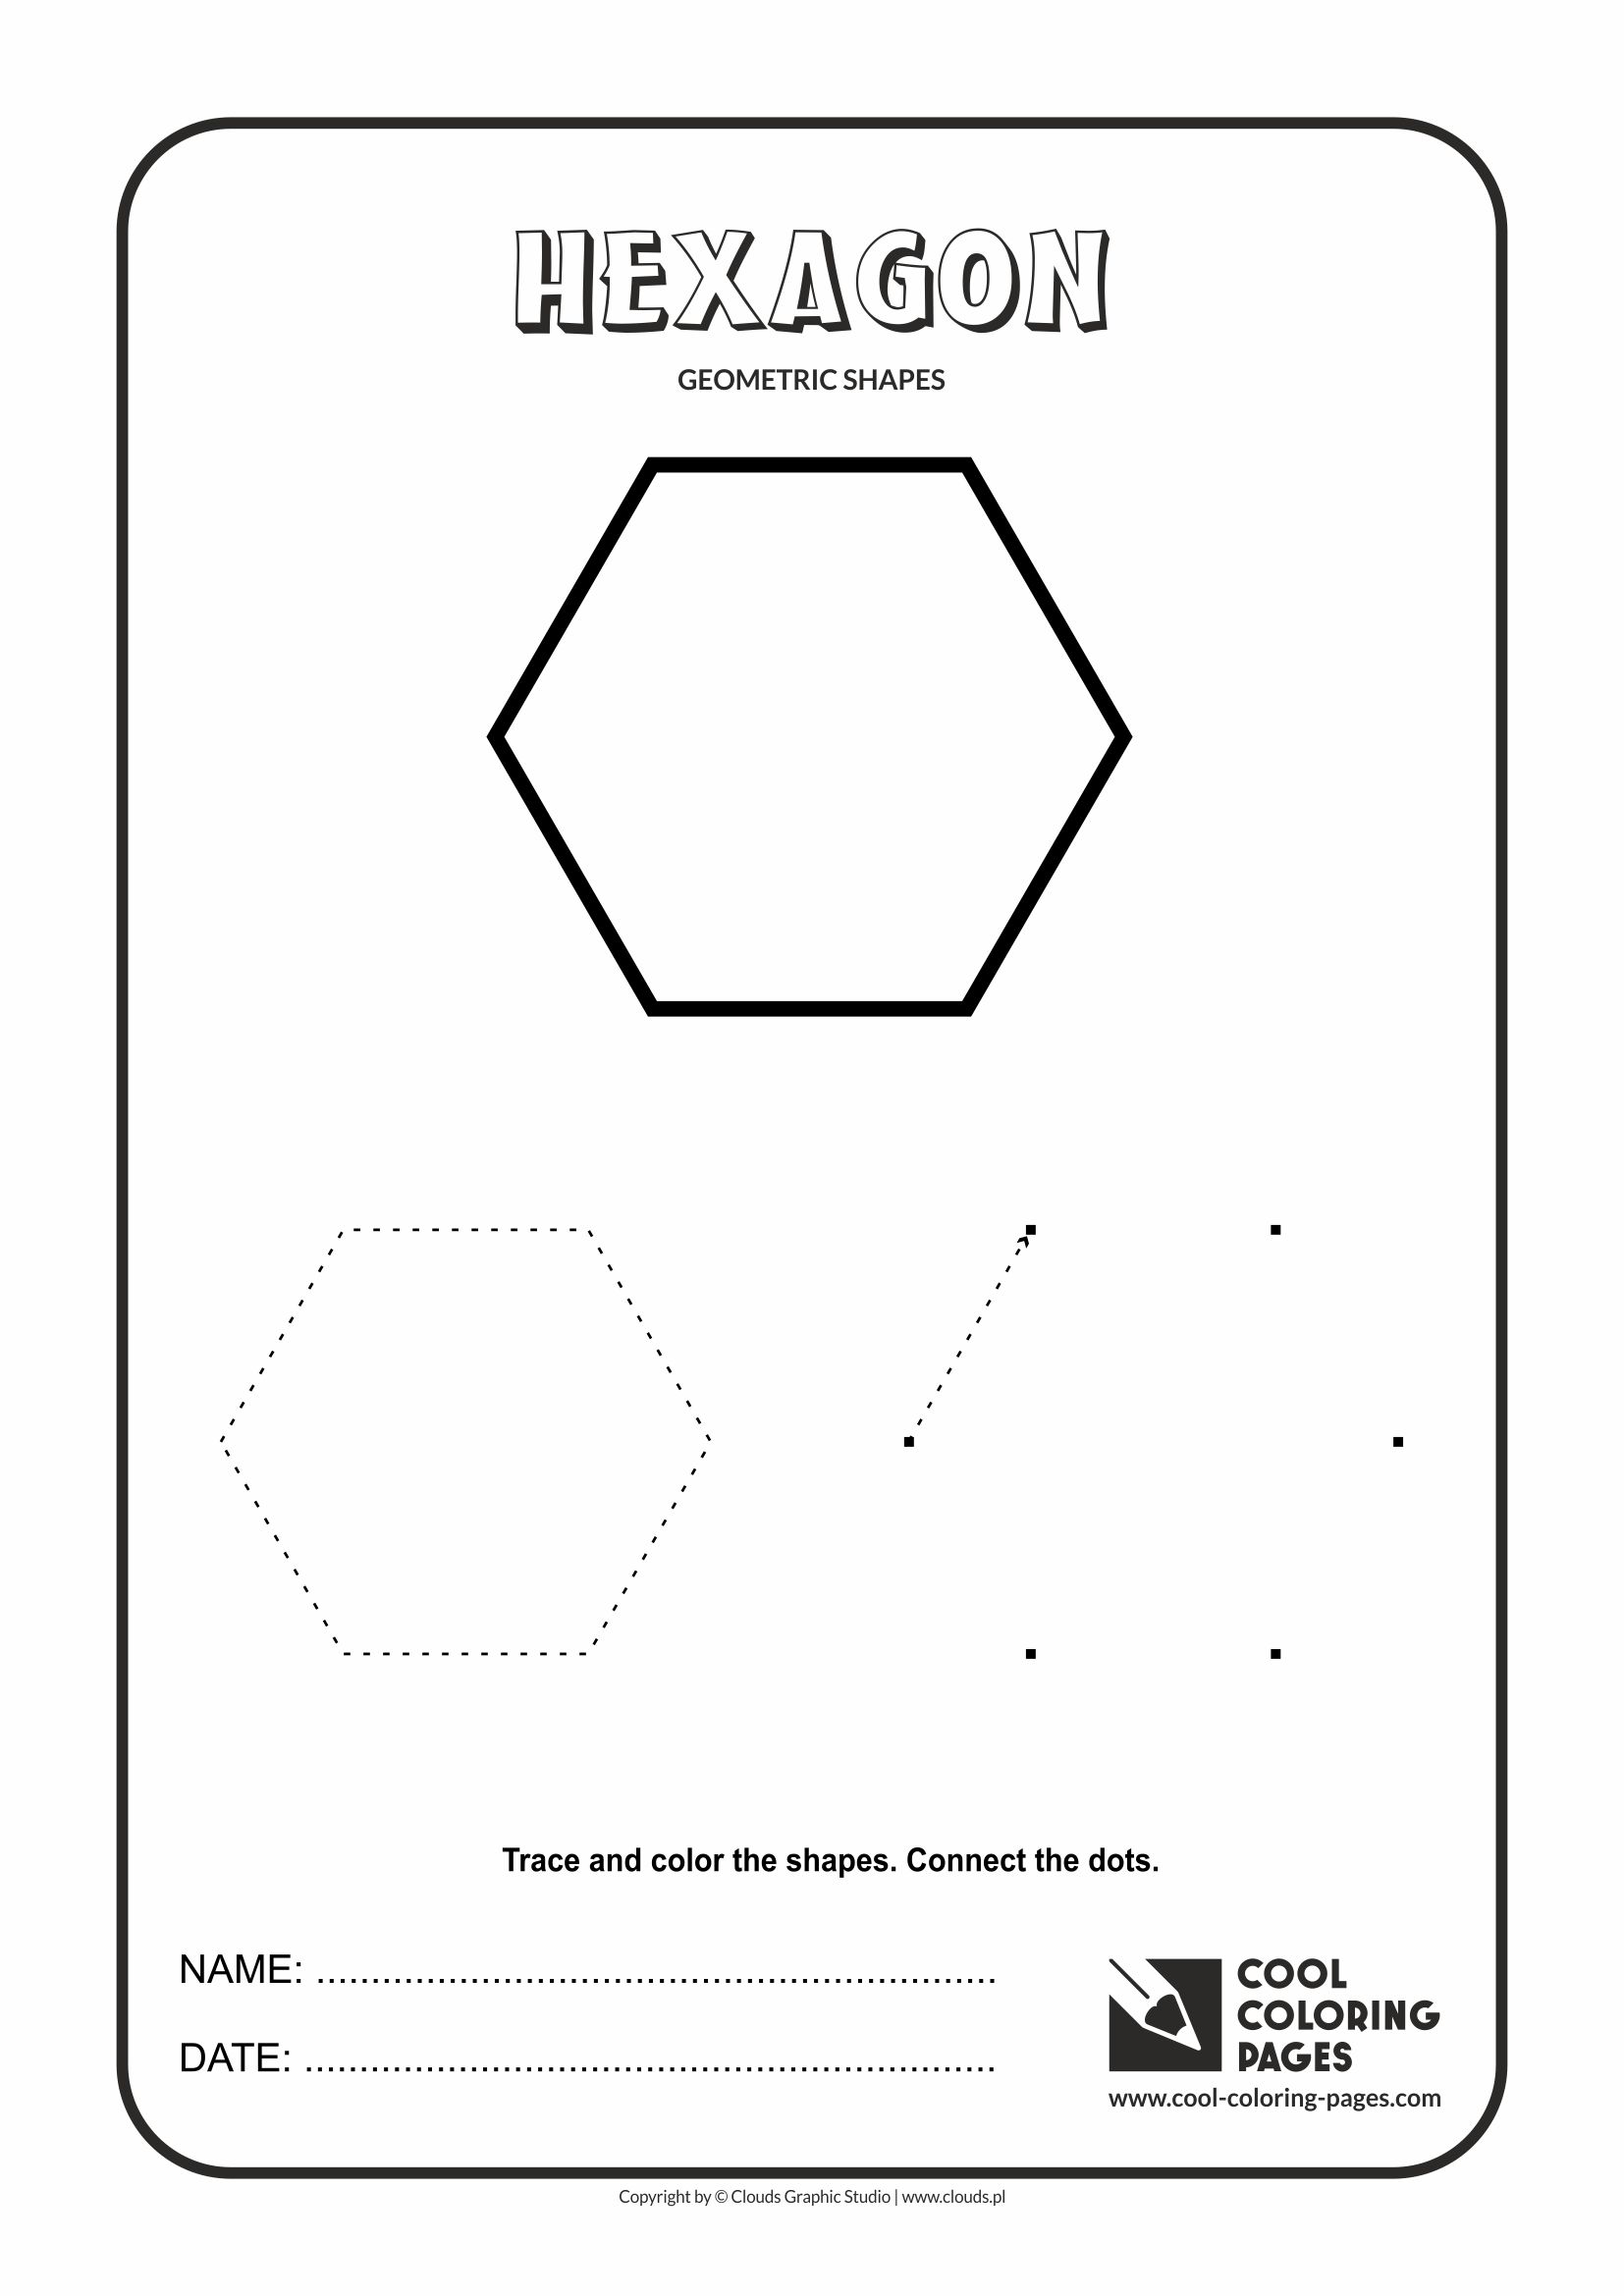 Cool coloring pages hexagon